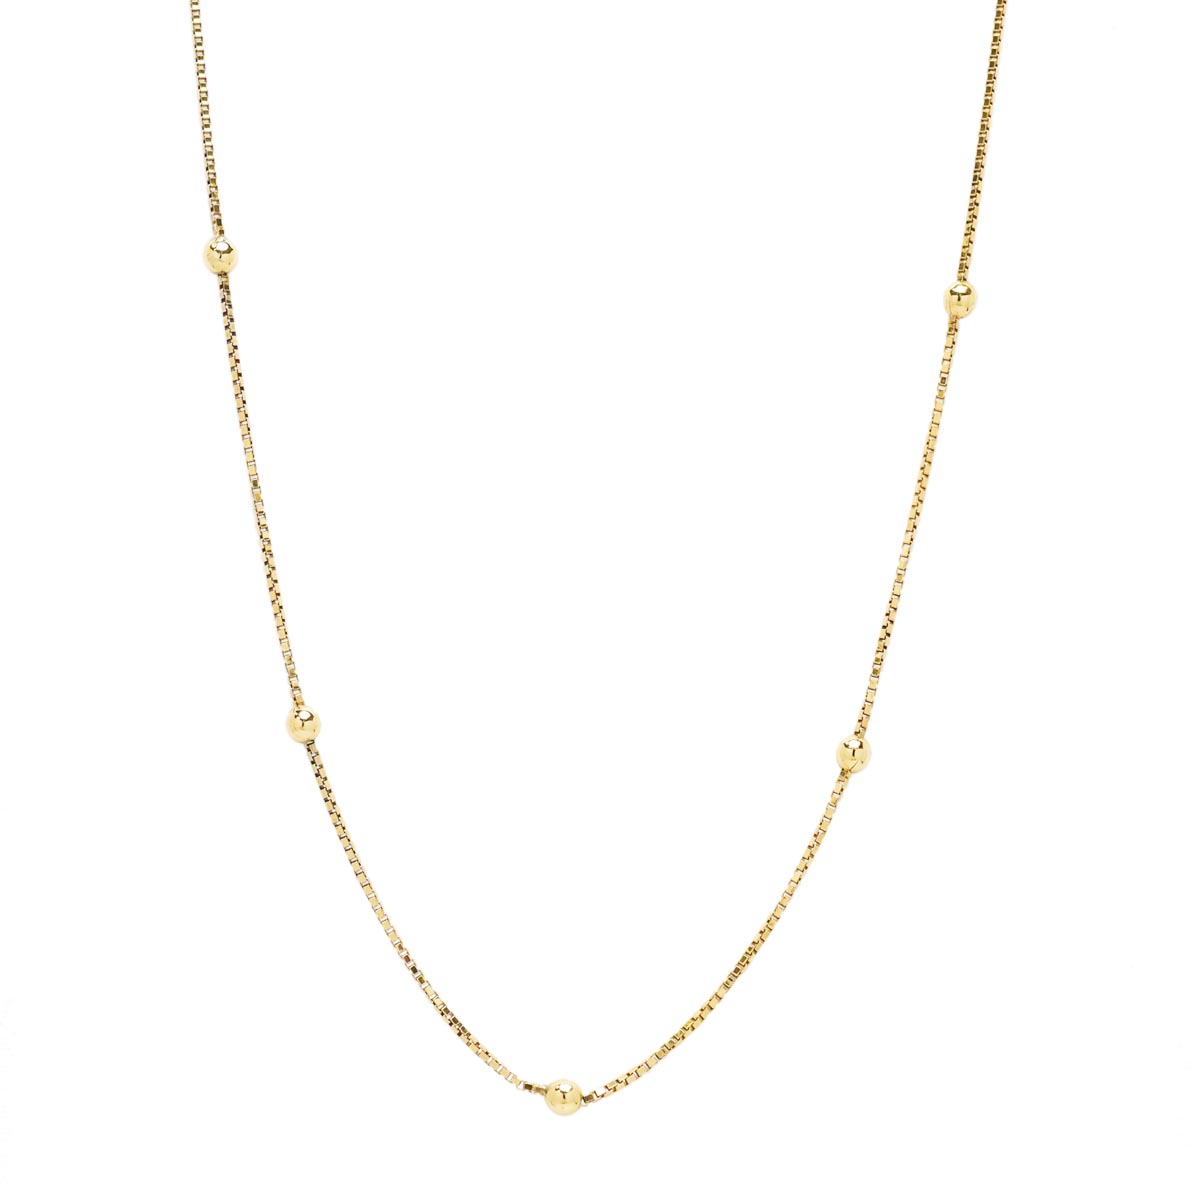 Estate Beaded Necklace in 14kt Yellow Gold